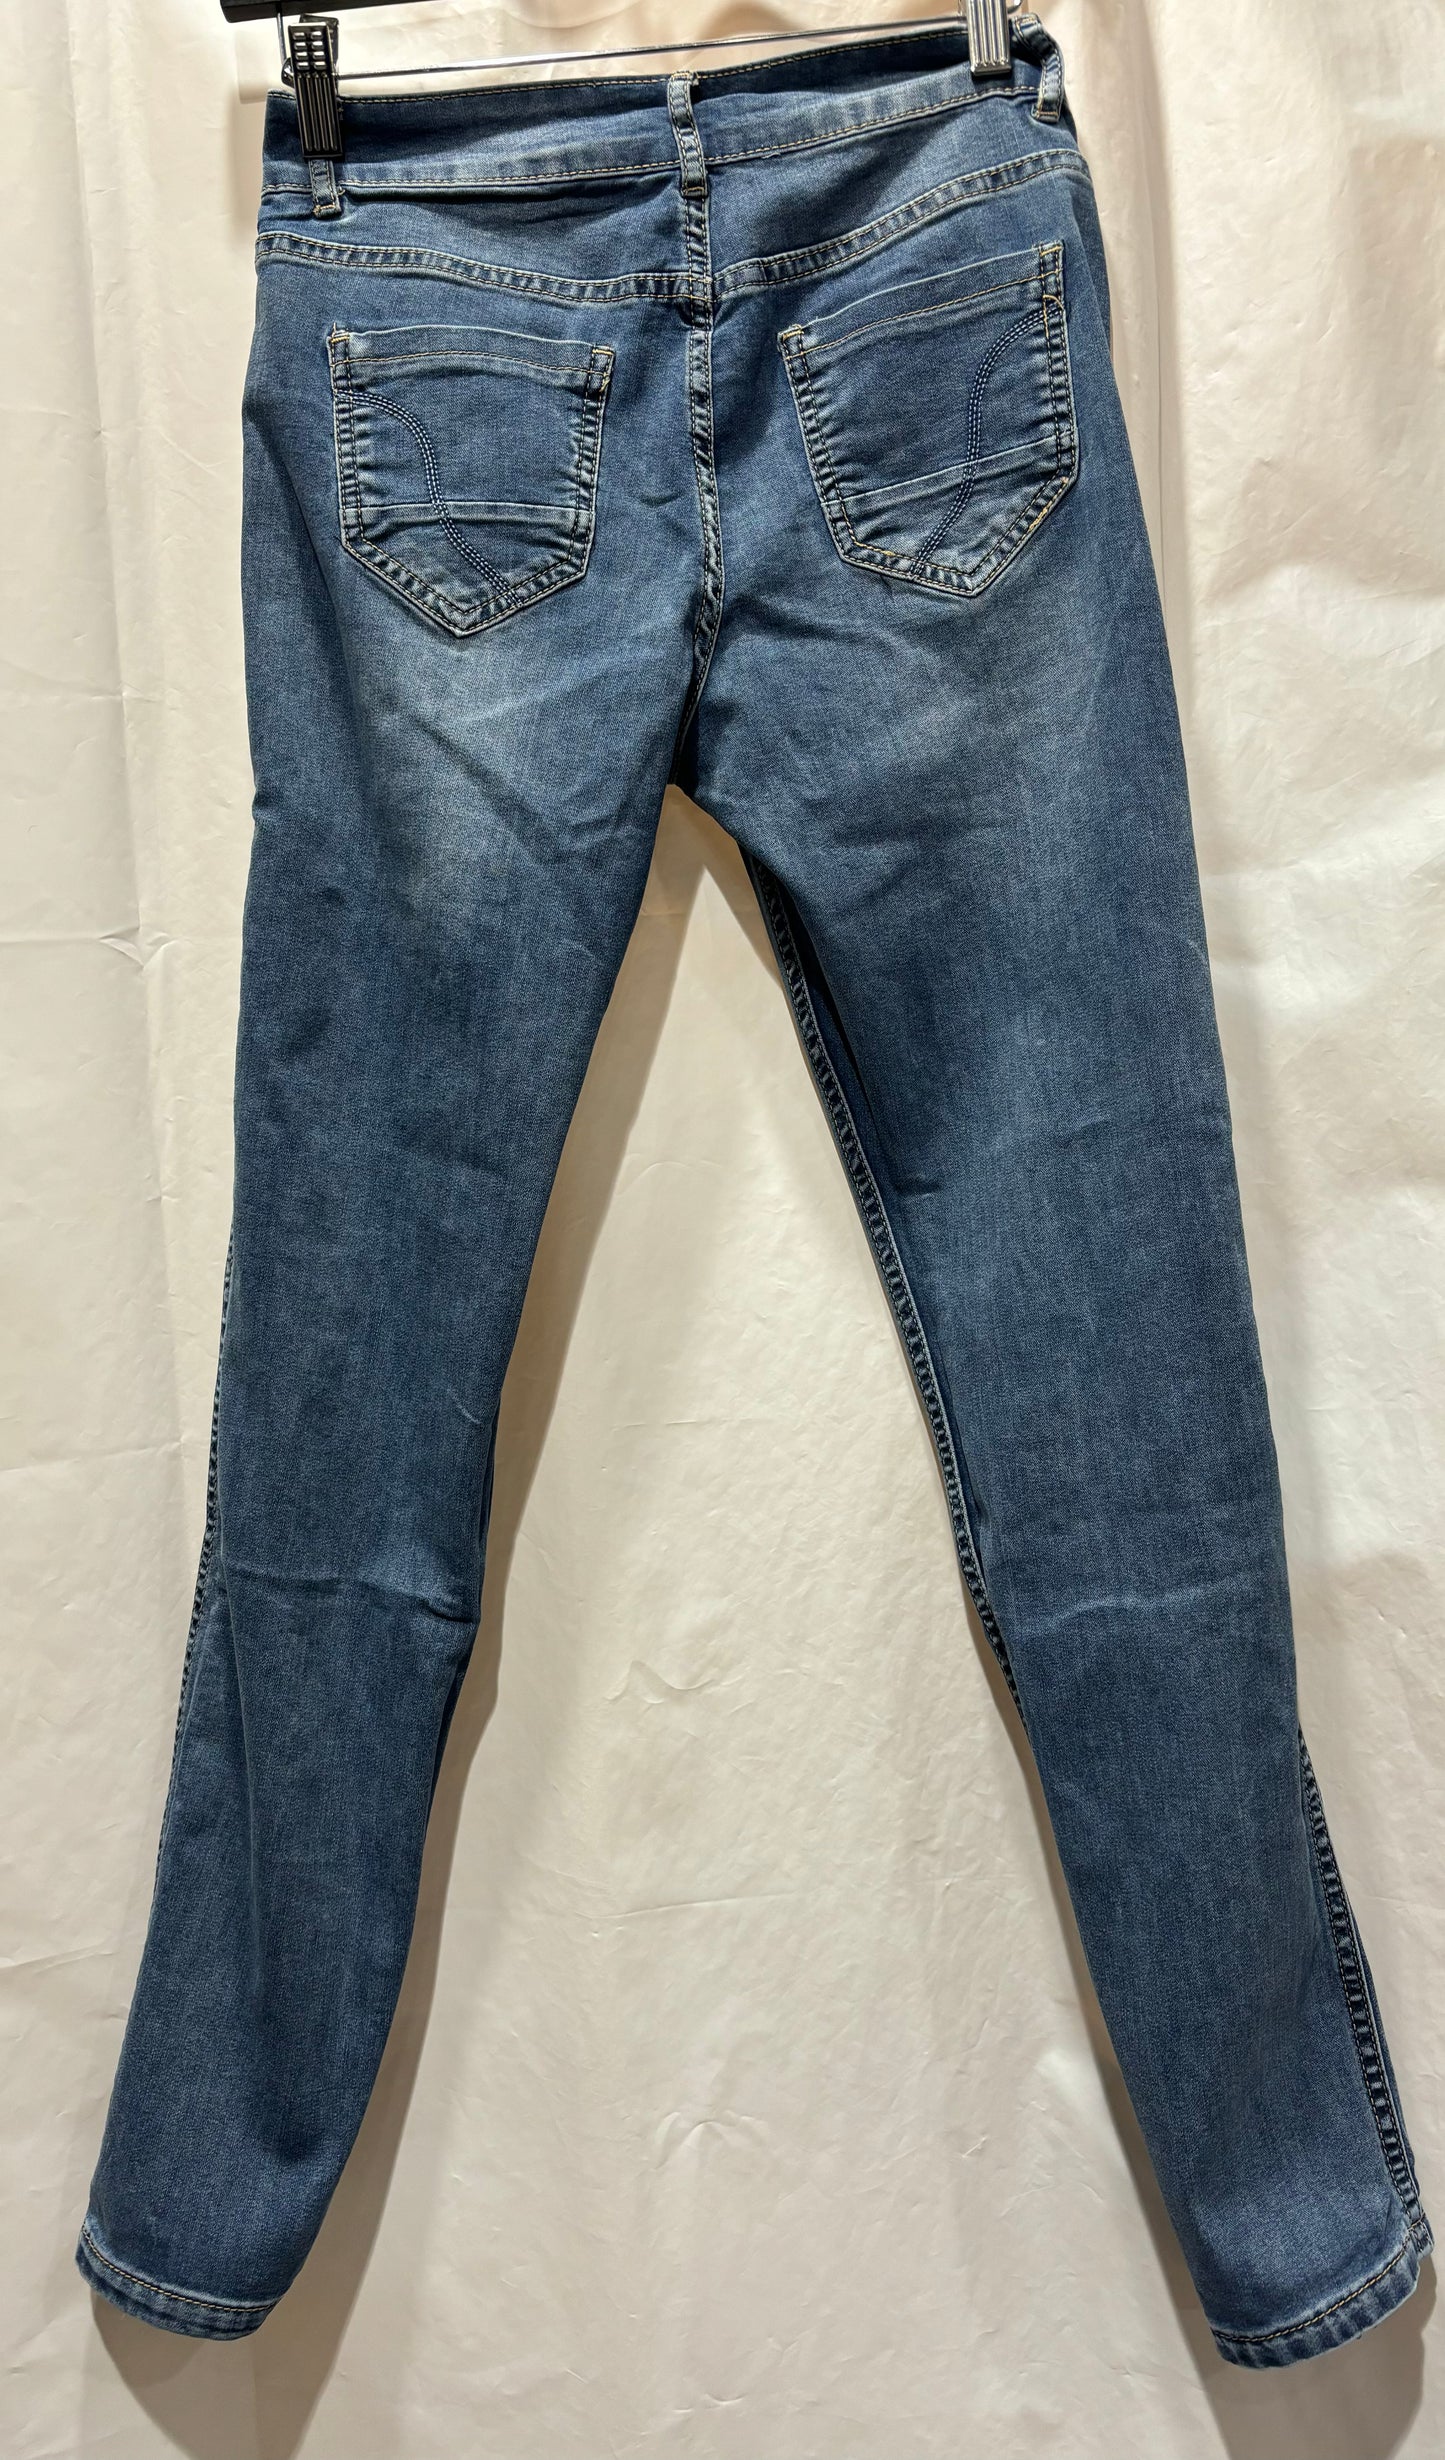 Reptile Design and Solid Denim Side Reversible Jeans